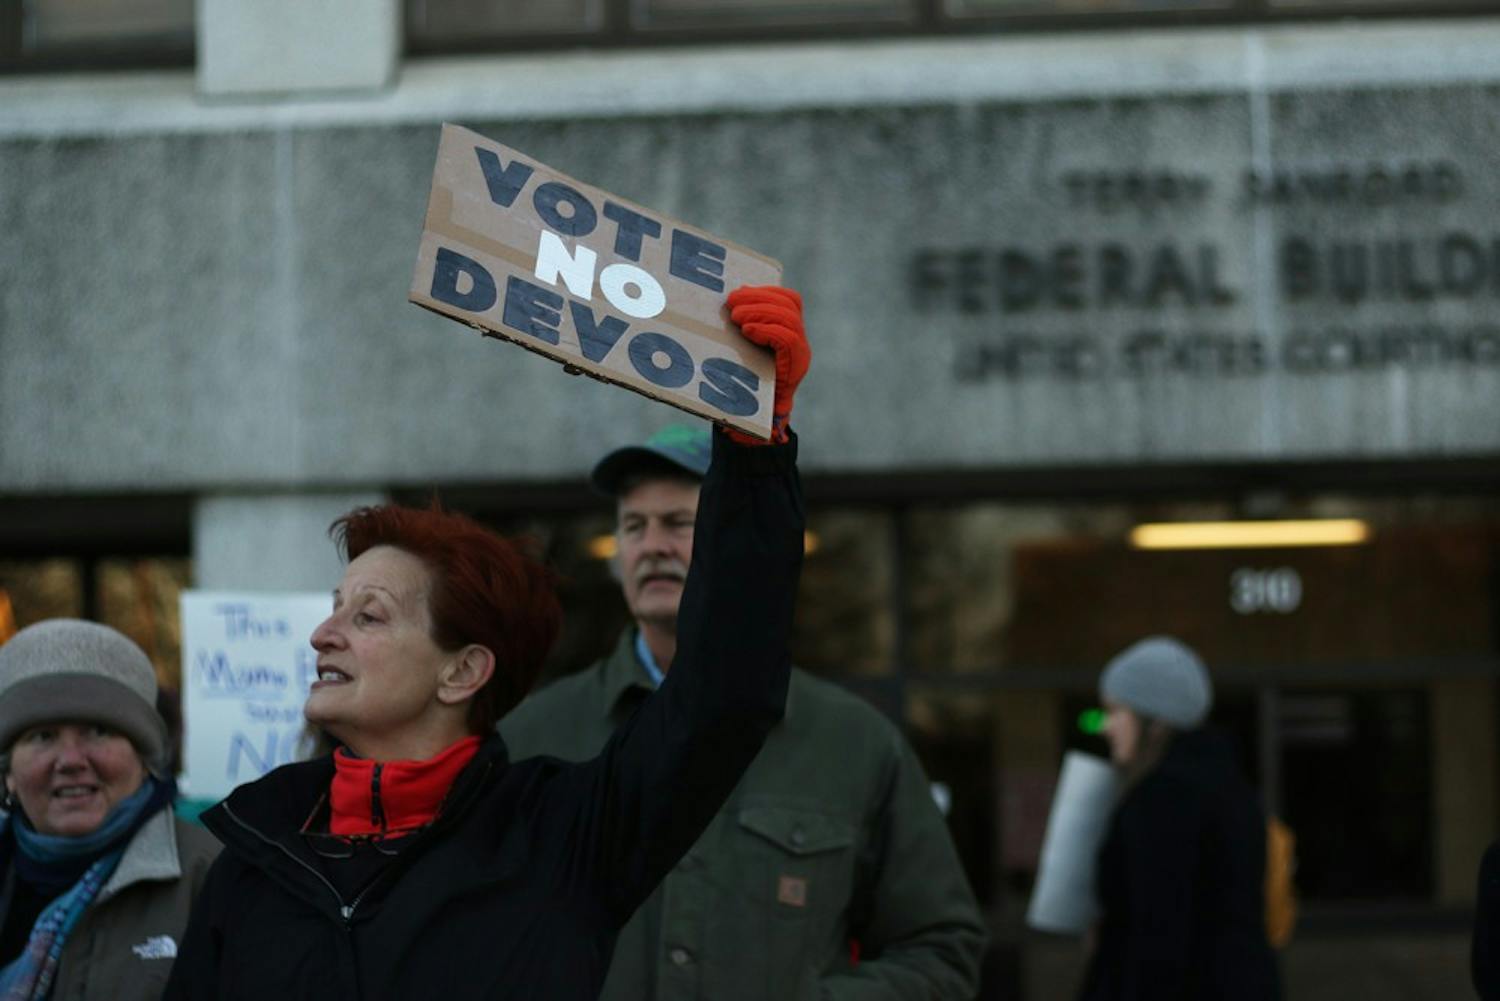 Michele Cox from Newton Grove, NC stands in front of the Federal Courthouse Building to ask Senator Tillis to vote no to Betsy DeVos.